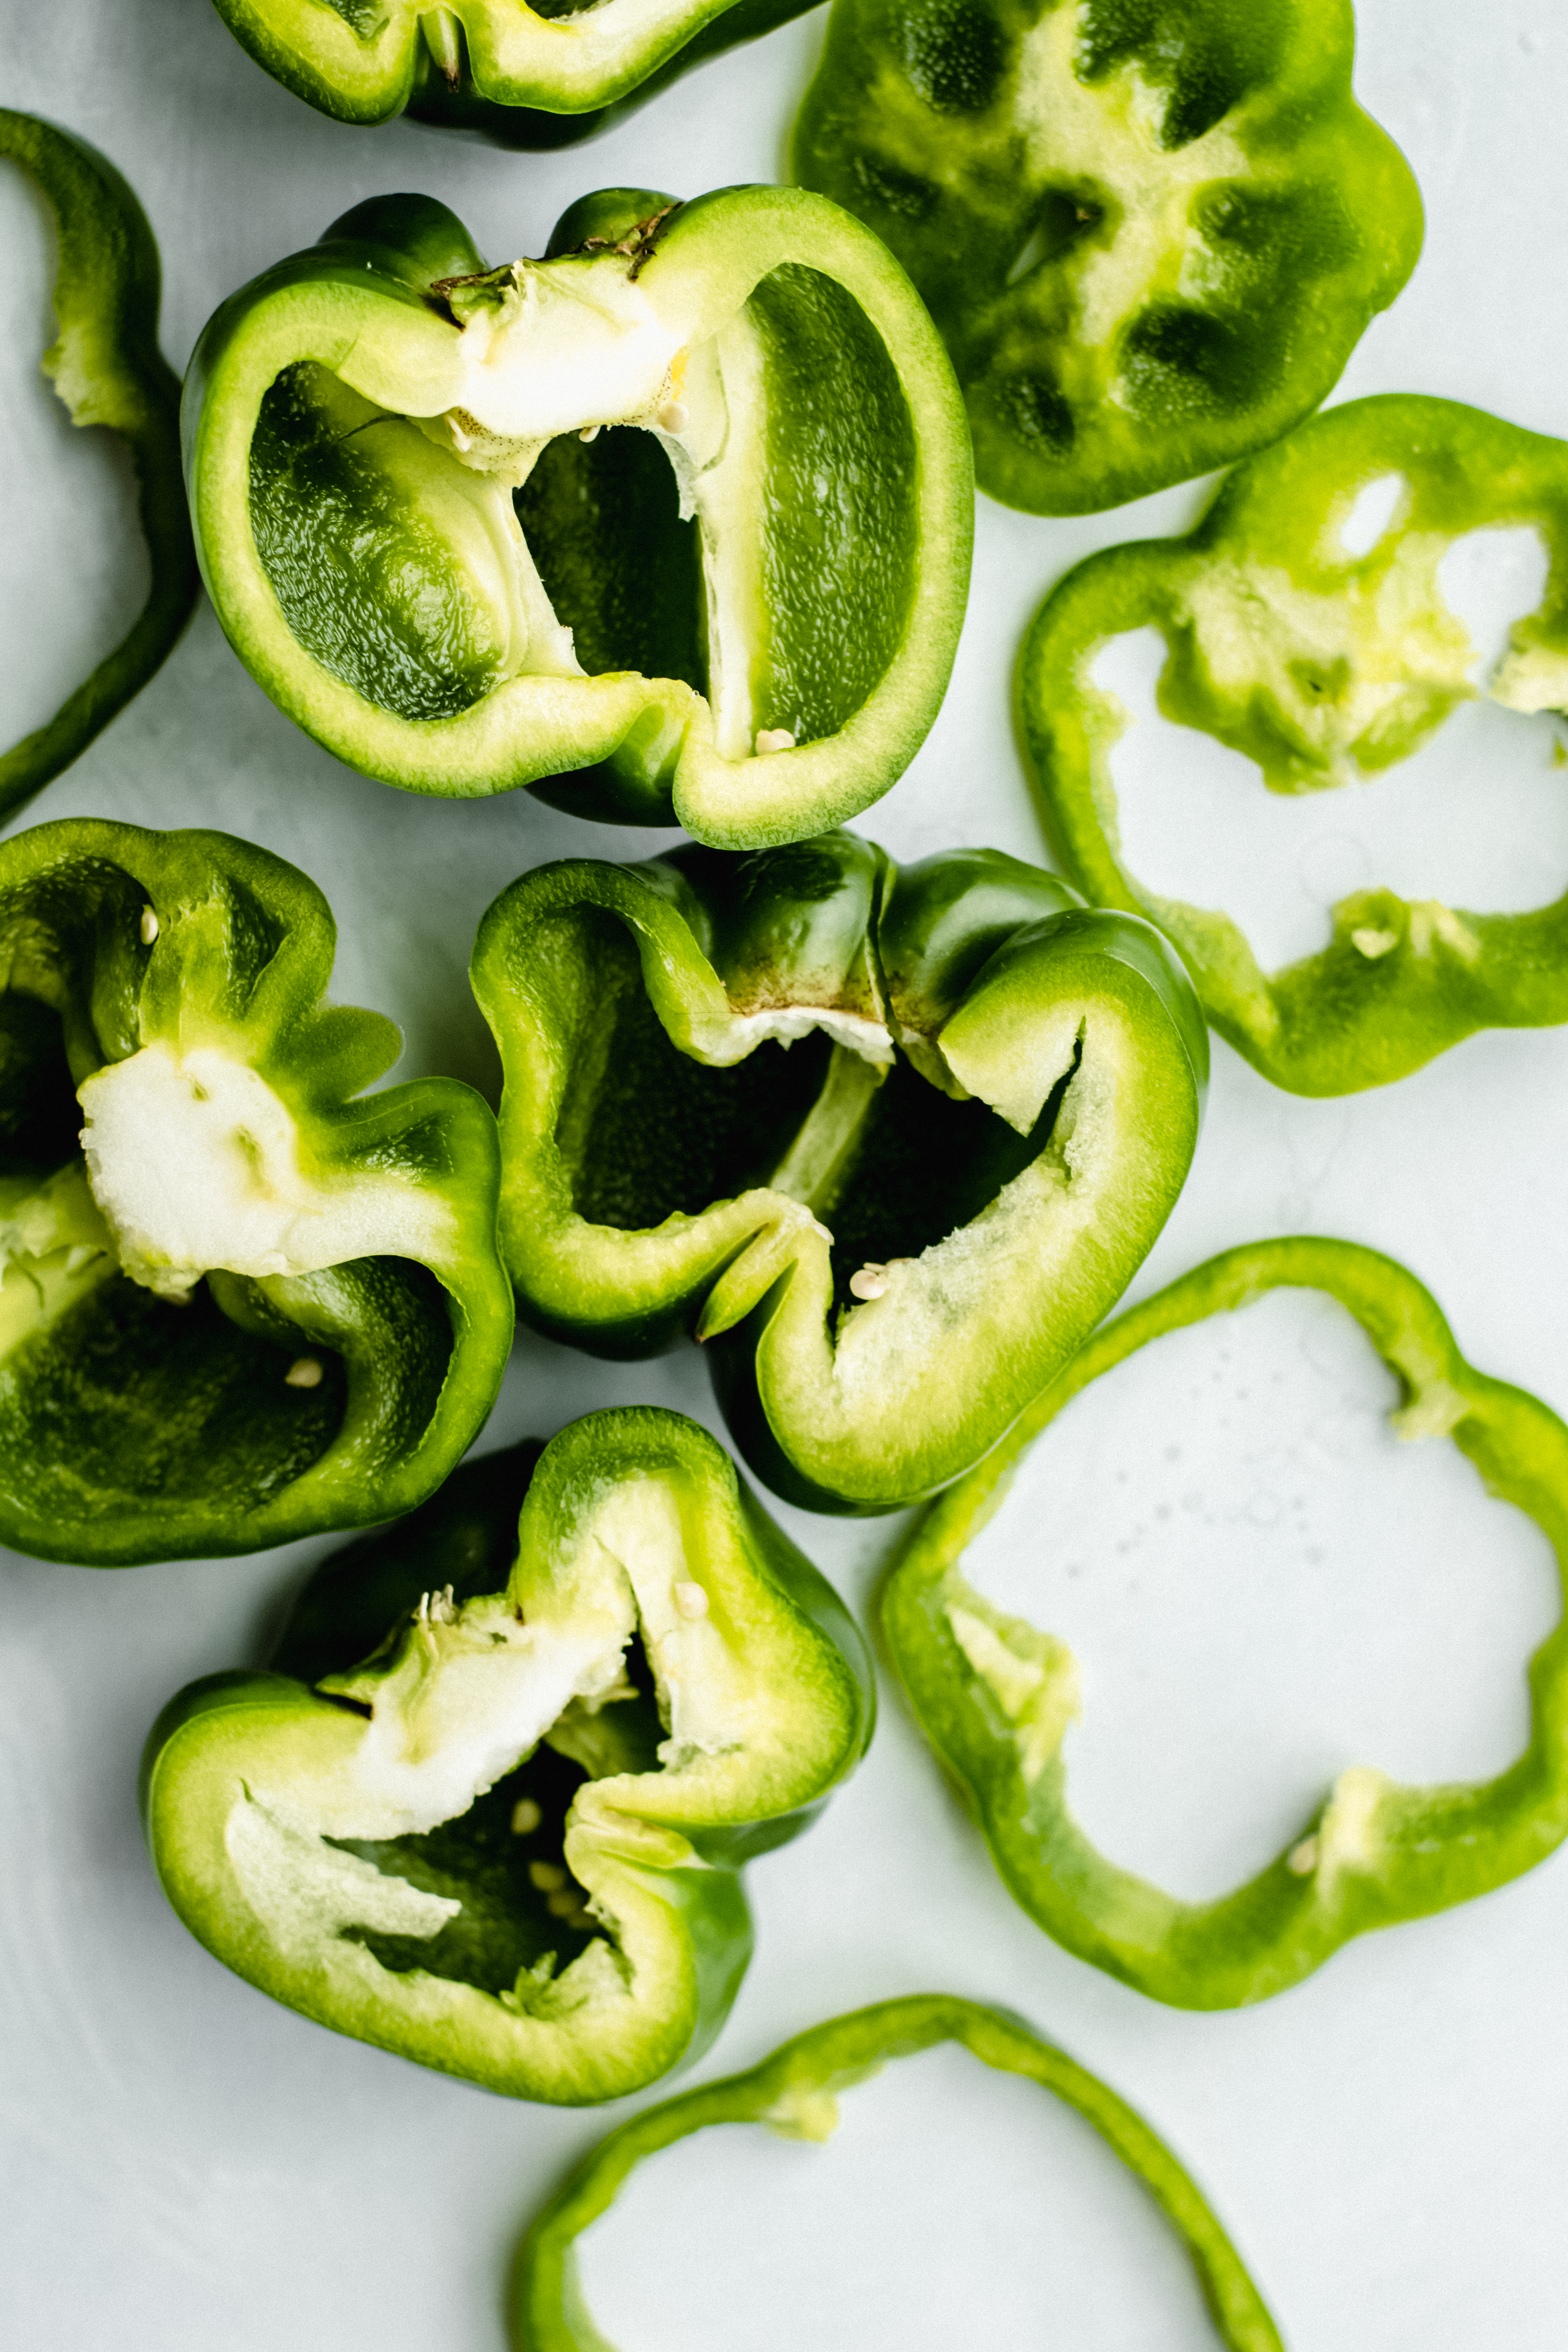 What The Heck Do I Do with Green Bell Peppers? - Misfits Market